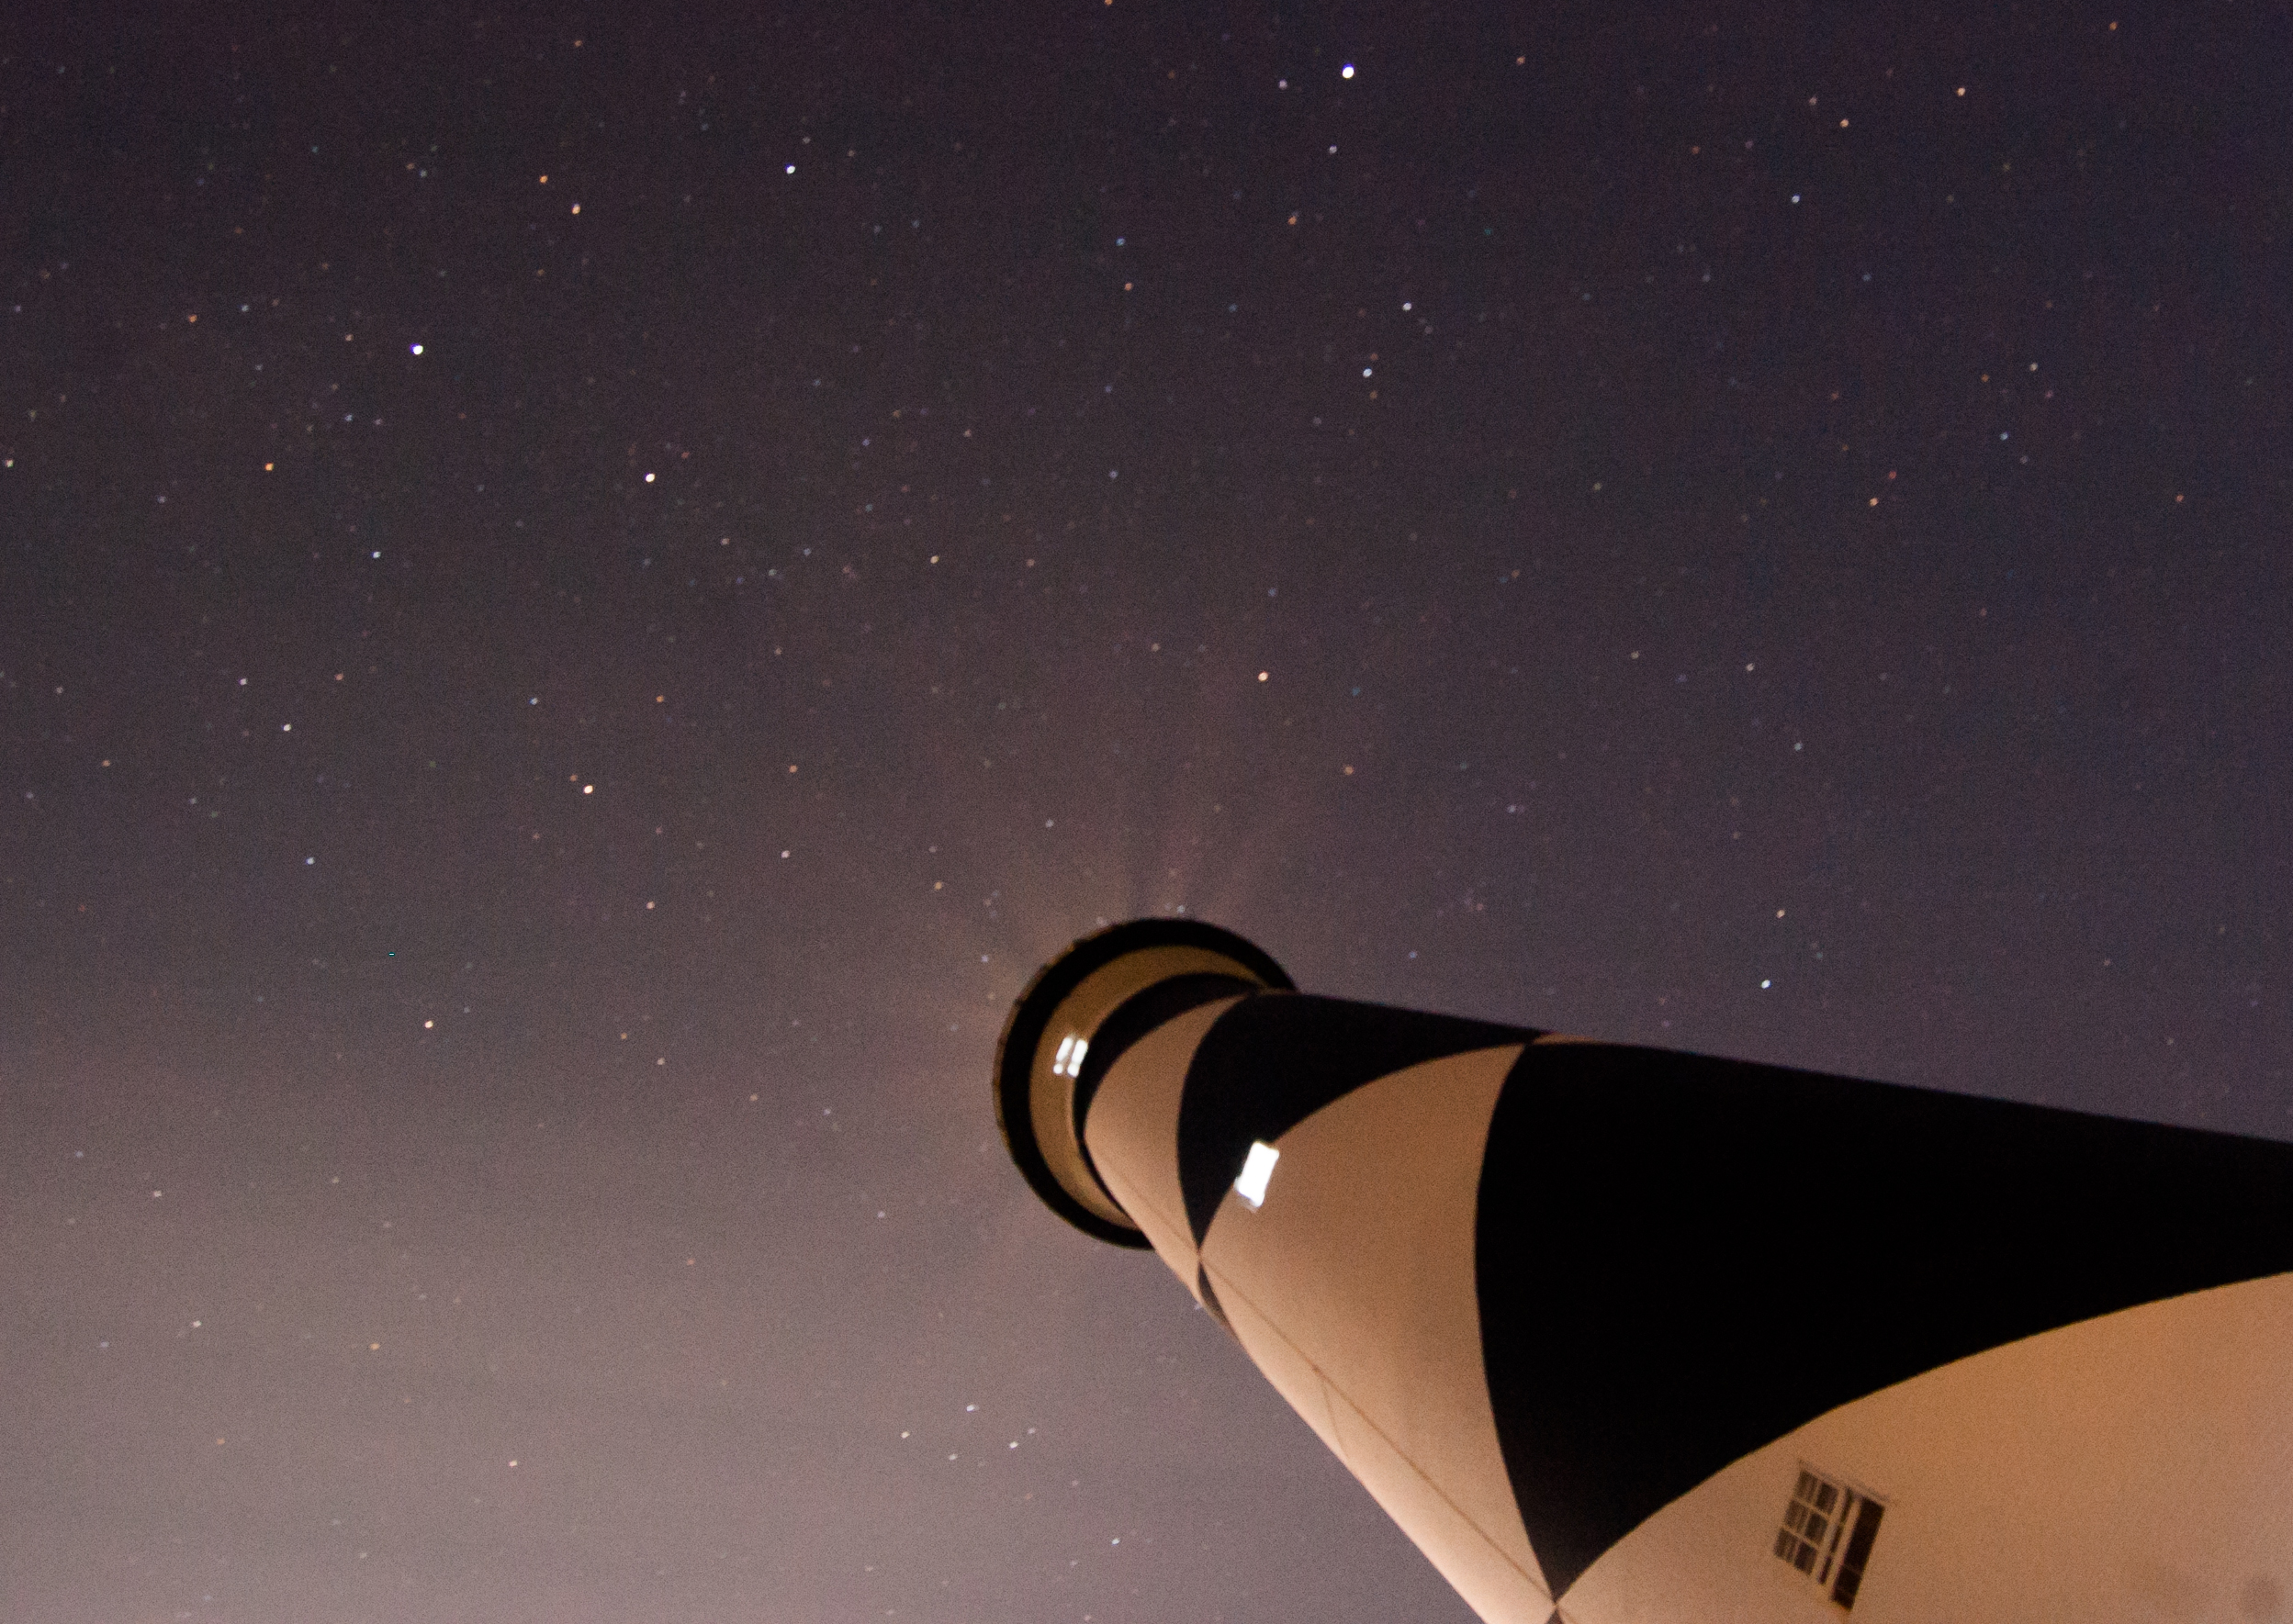 The starry night sky above the Cape Lookout Lighthouse